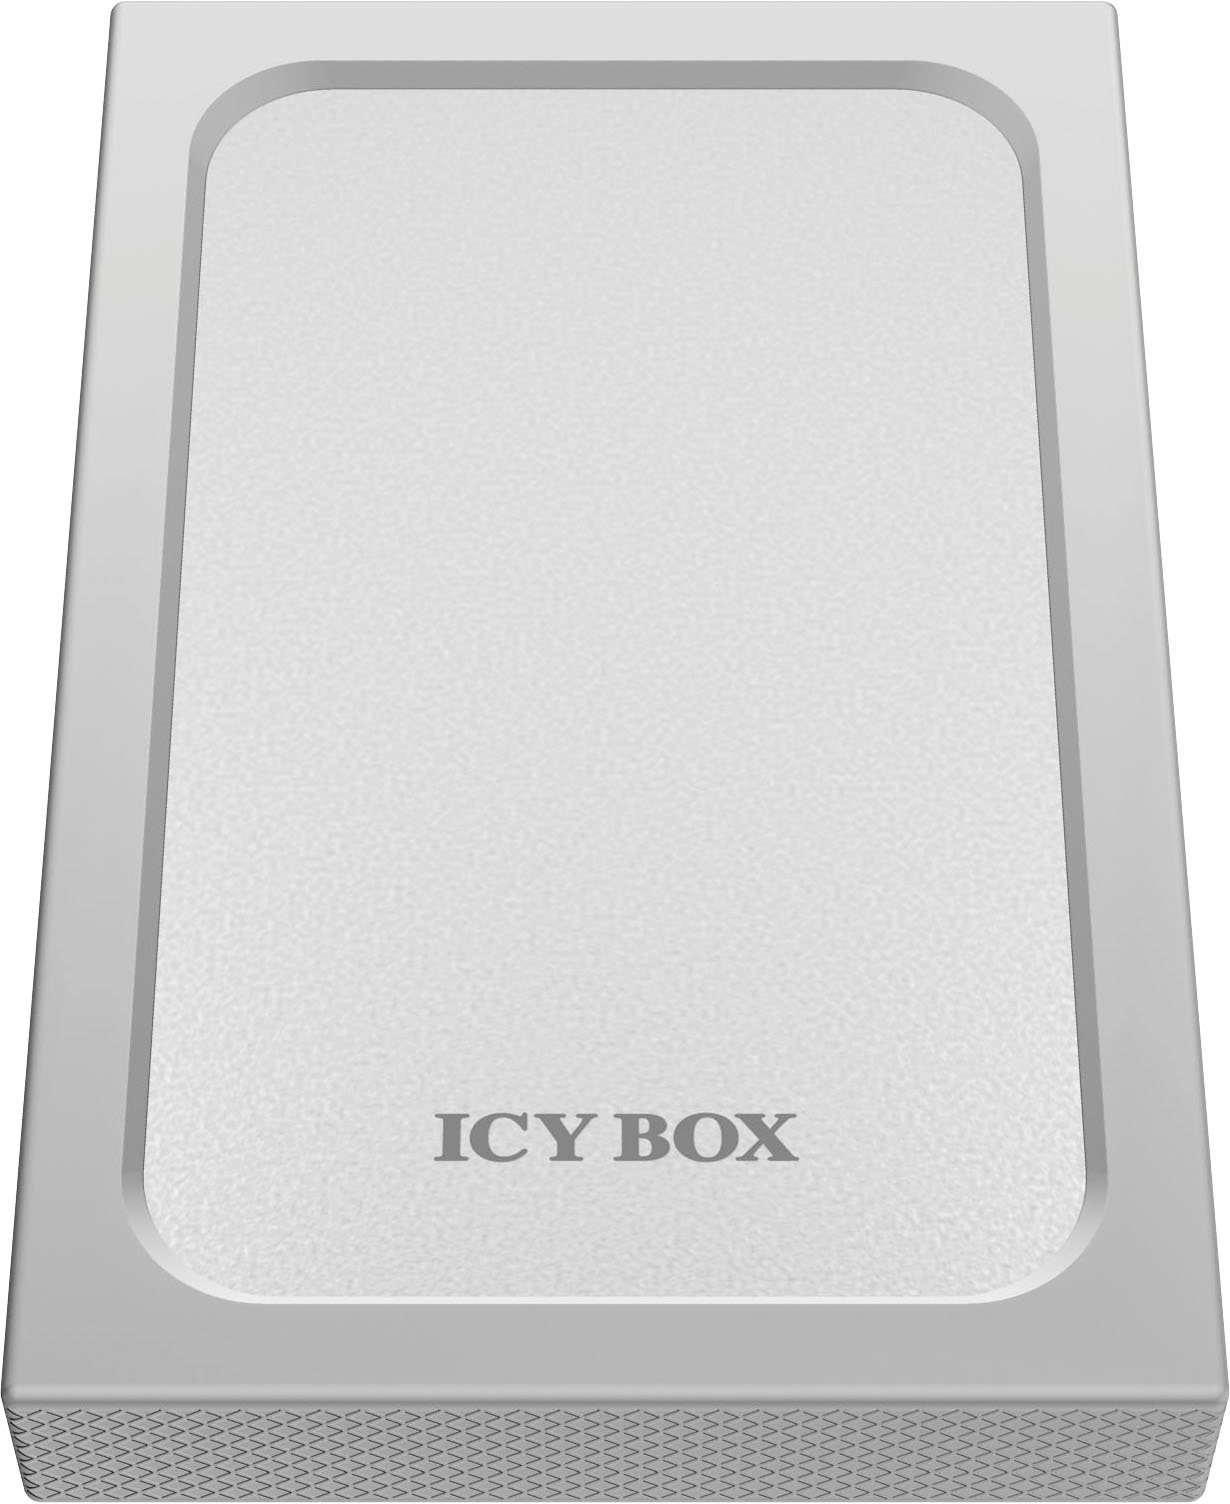 ICY BOX ICY 2,5 Zoll USB 3.0 Case for SATA HDD/SSD Computer-Adapter